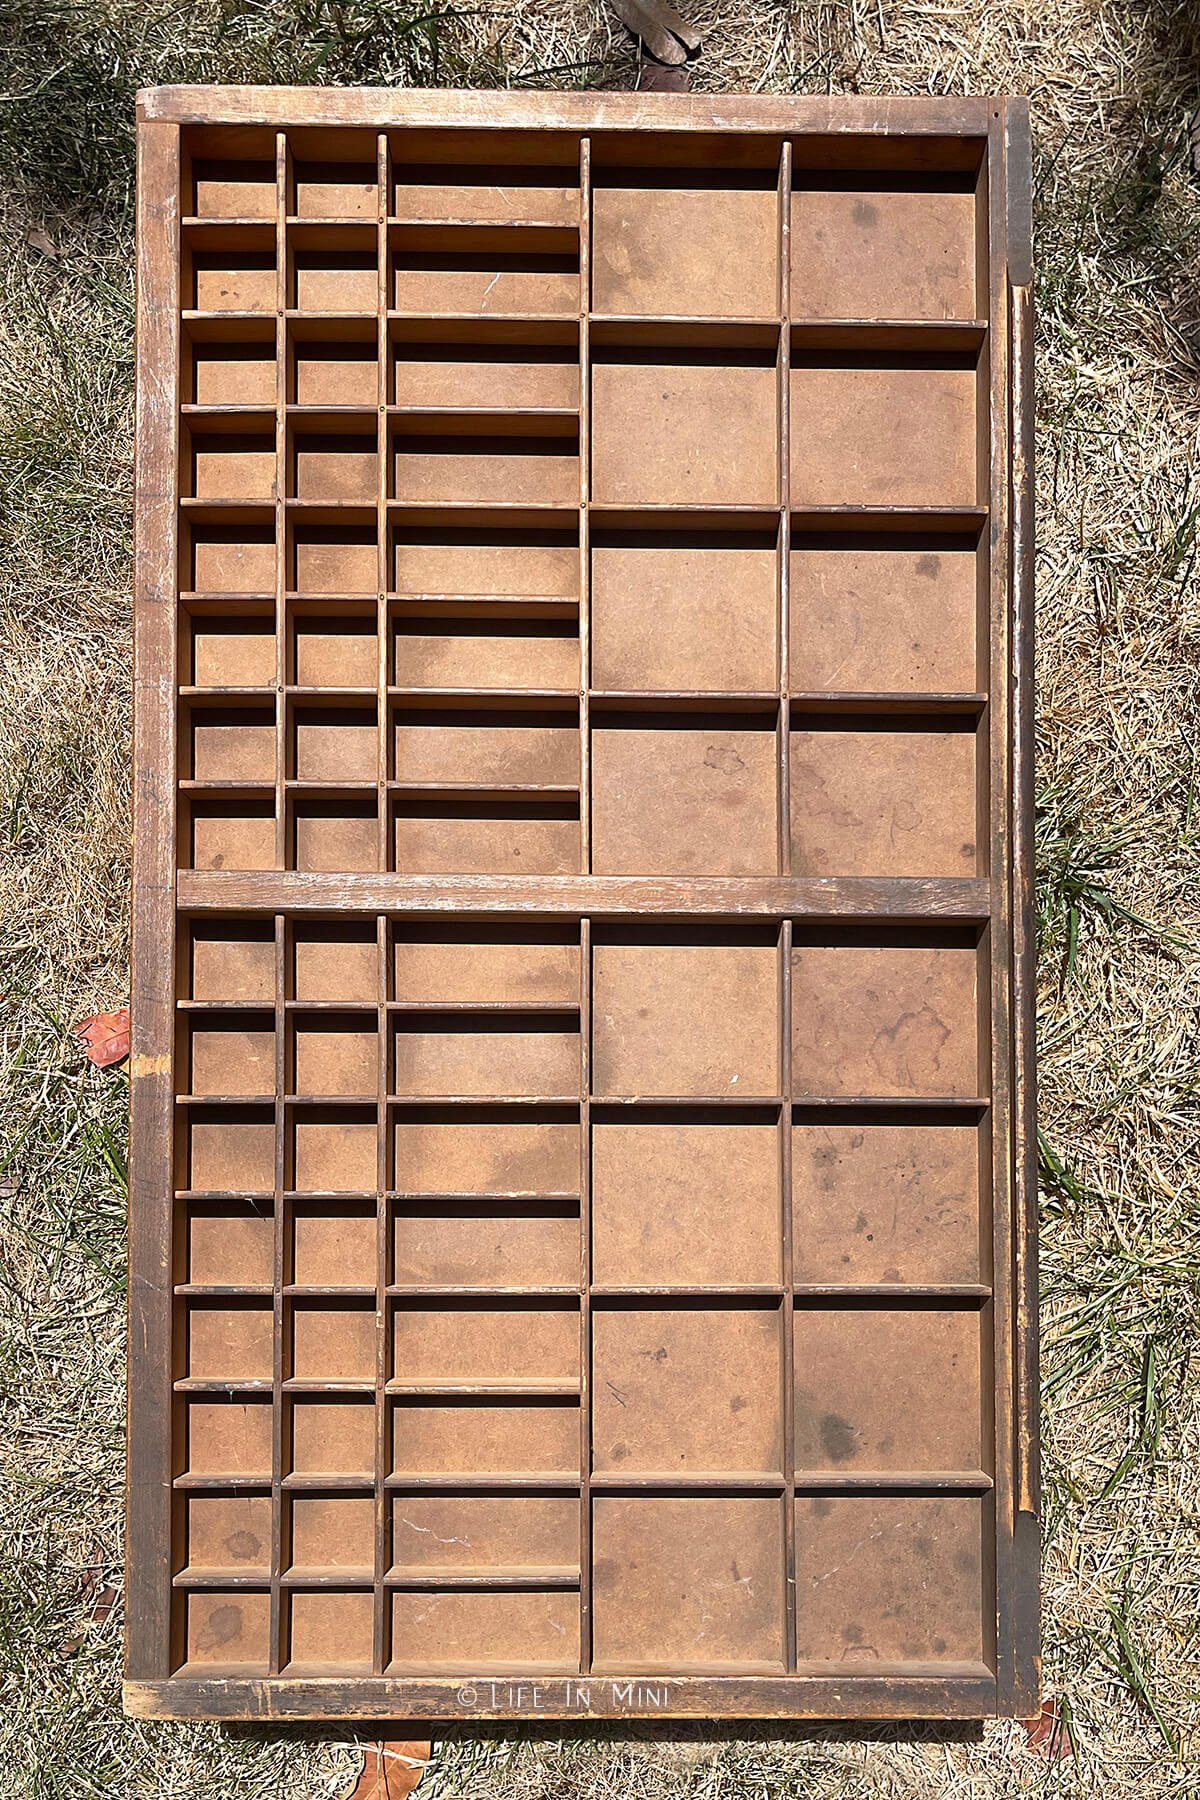 A vintage letterpress tray outside on the grass